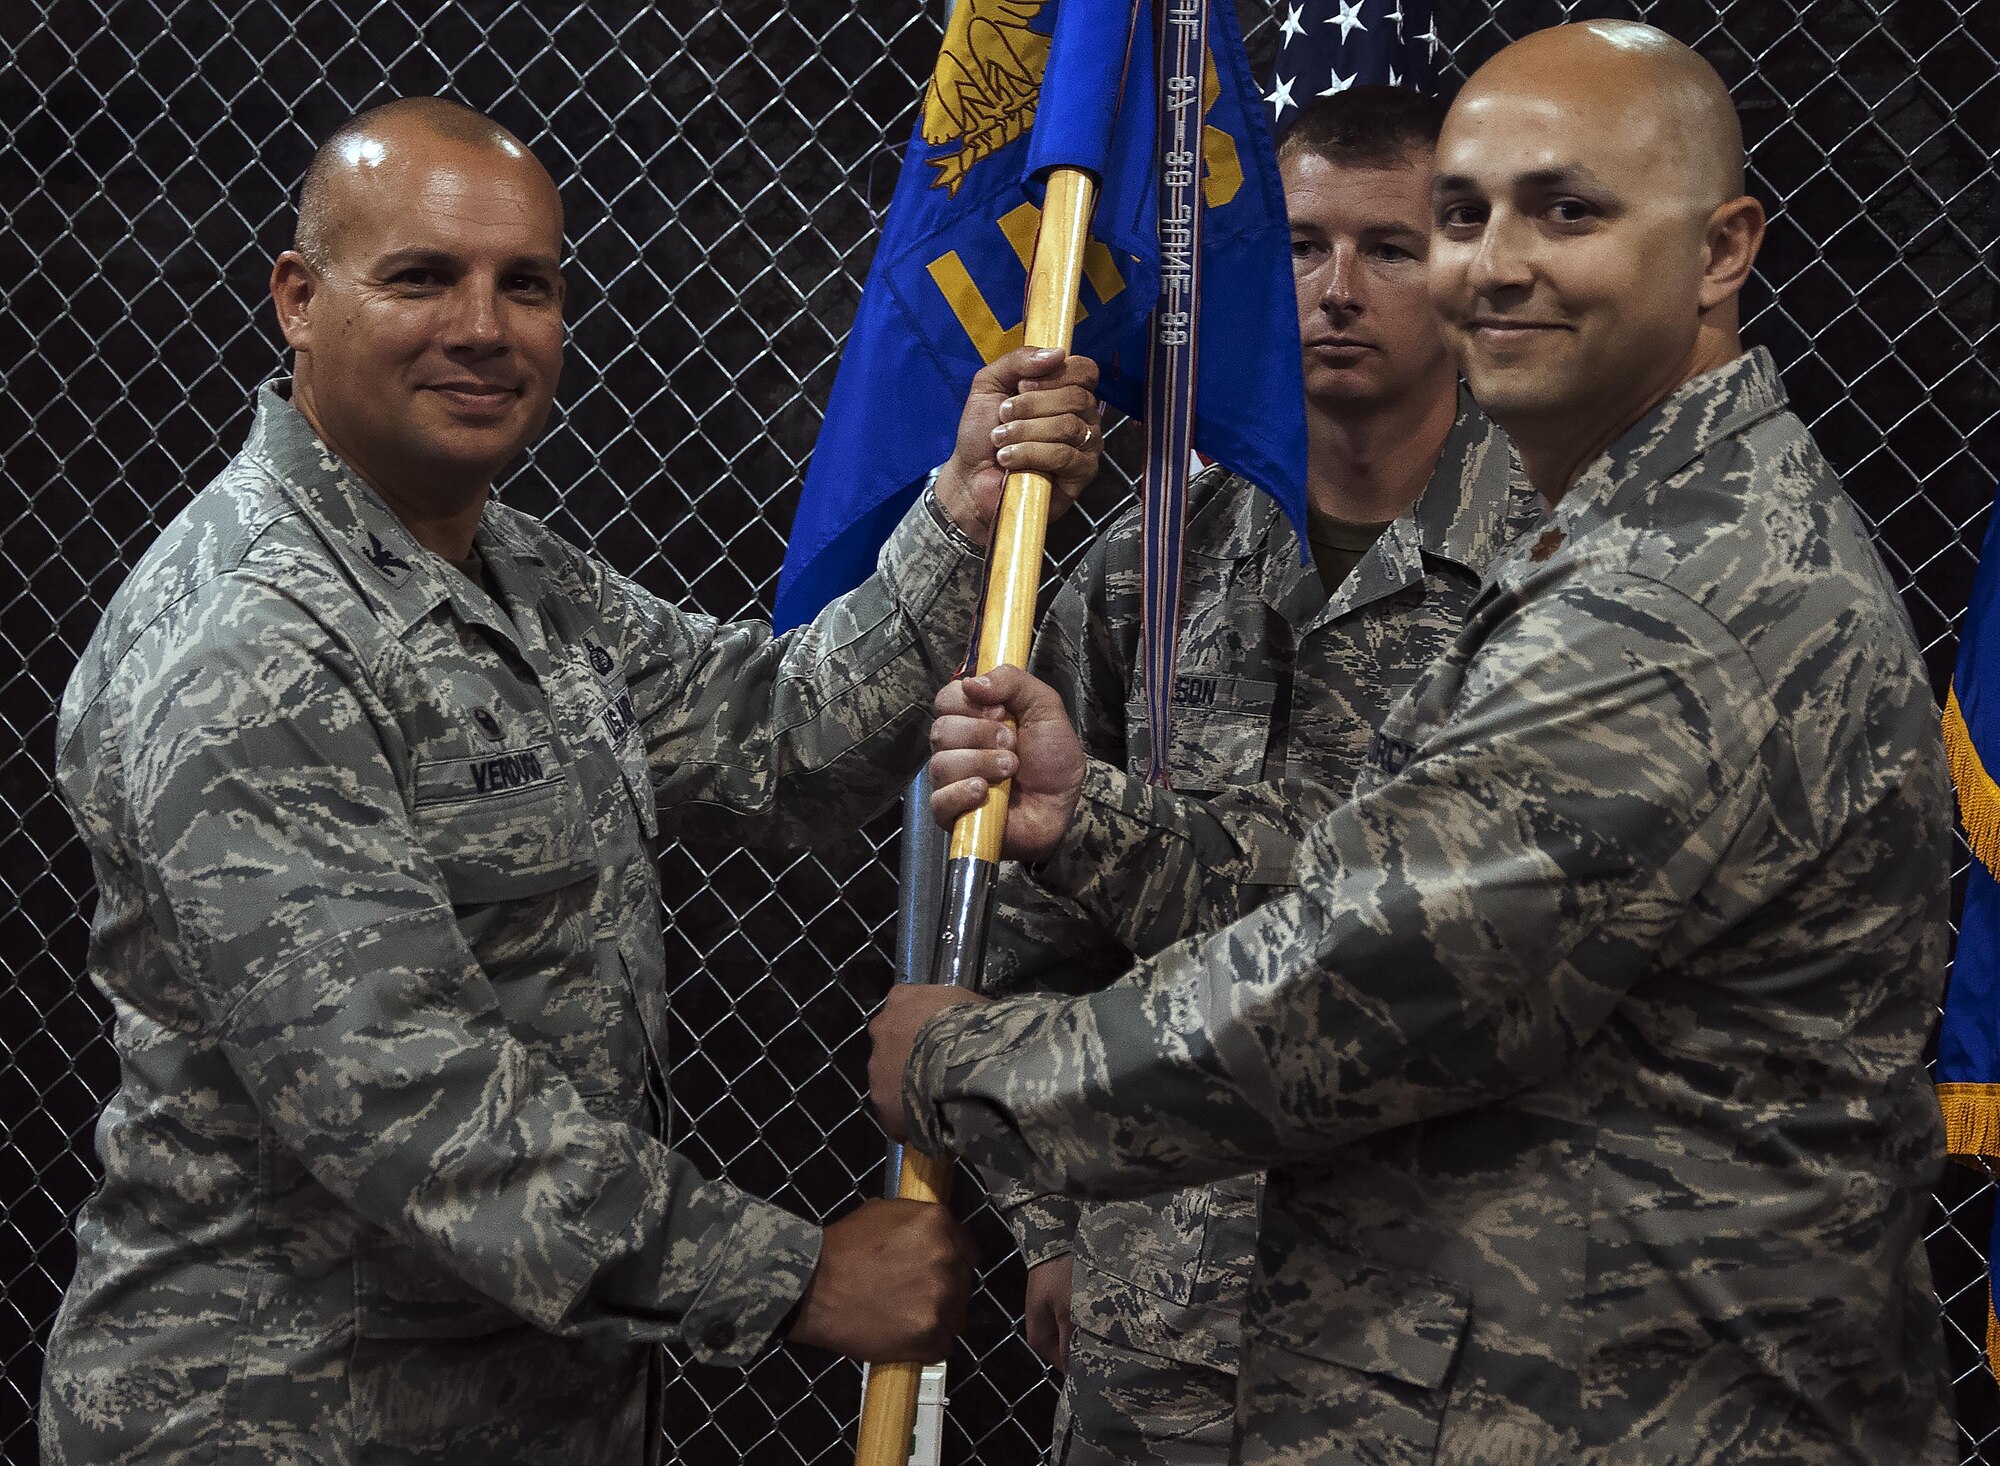 Col. Frank Verdugo, 90th Mission Support Group commander, passes the 90th Logistics Readiness Squadron guidon to the squadron’s new commander, Maj. Marc Hernandez, during a change-of-command ceremony July 8, 2016, on F.E. Warren Air Force Base, Wyo. The ceremony signified the transition of command from Lt. Col. Ross Sutherland to Hernandez. (U.S. Air Force photo by Senior Airman Brandon Valle)